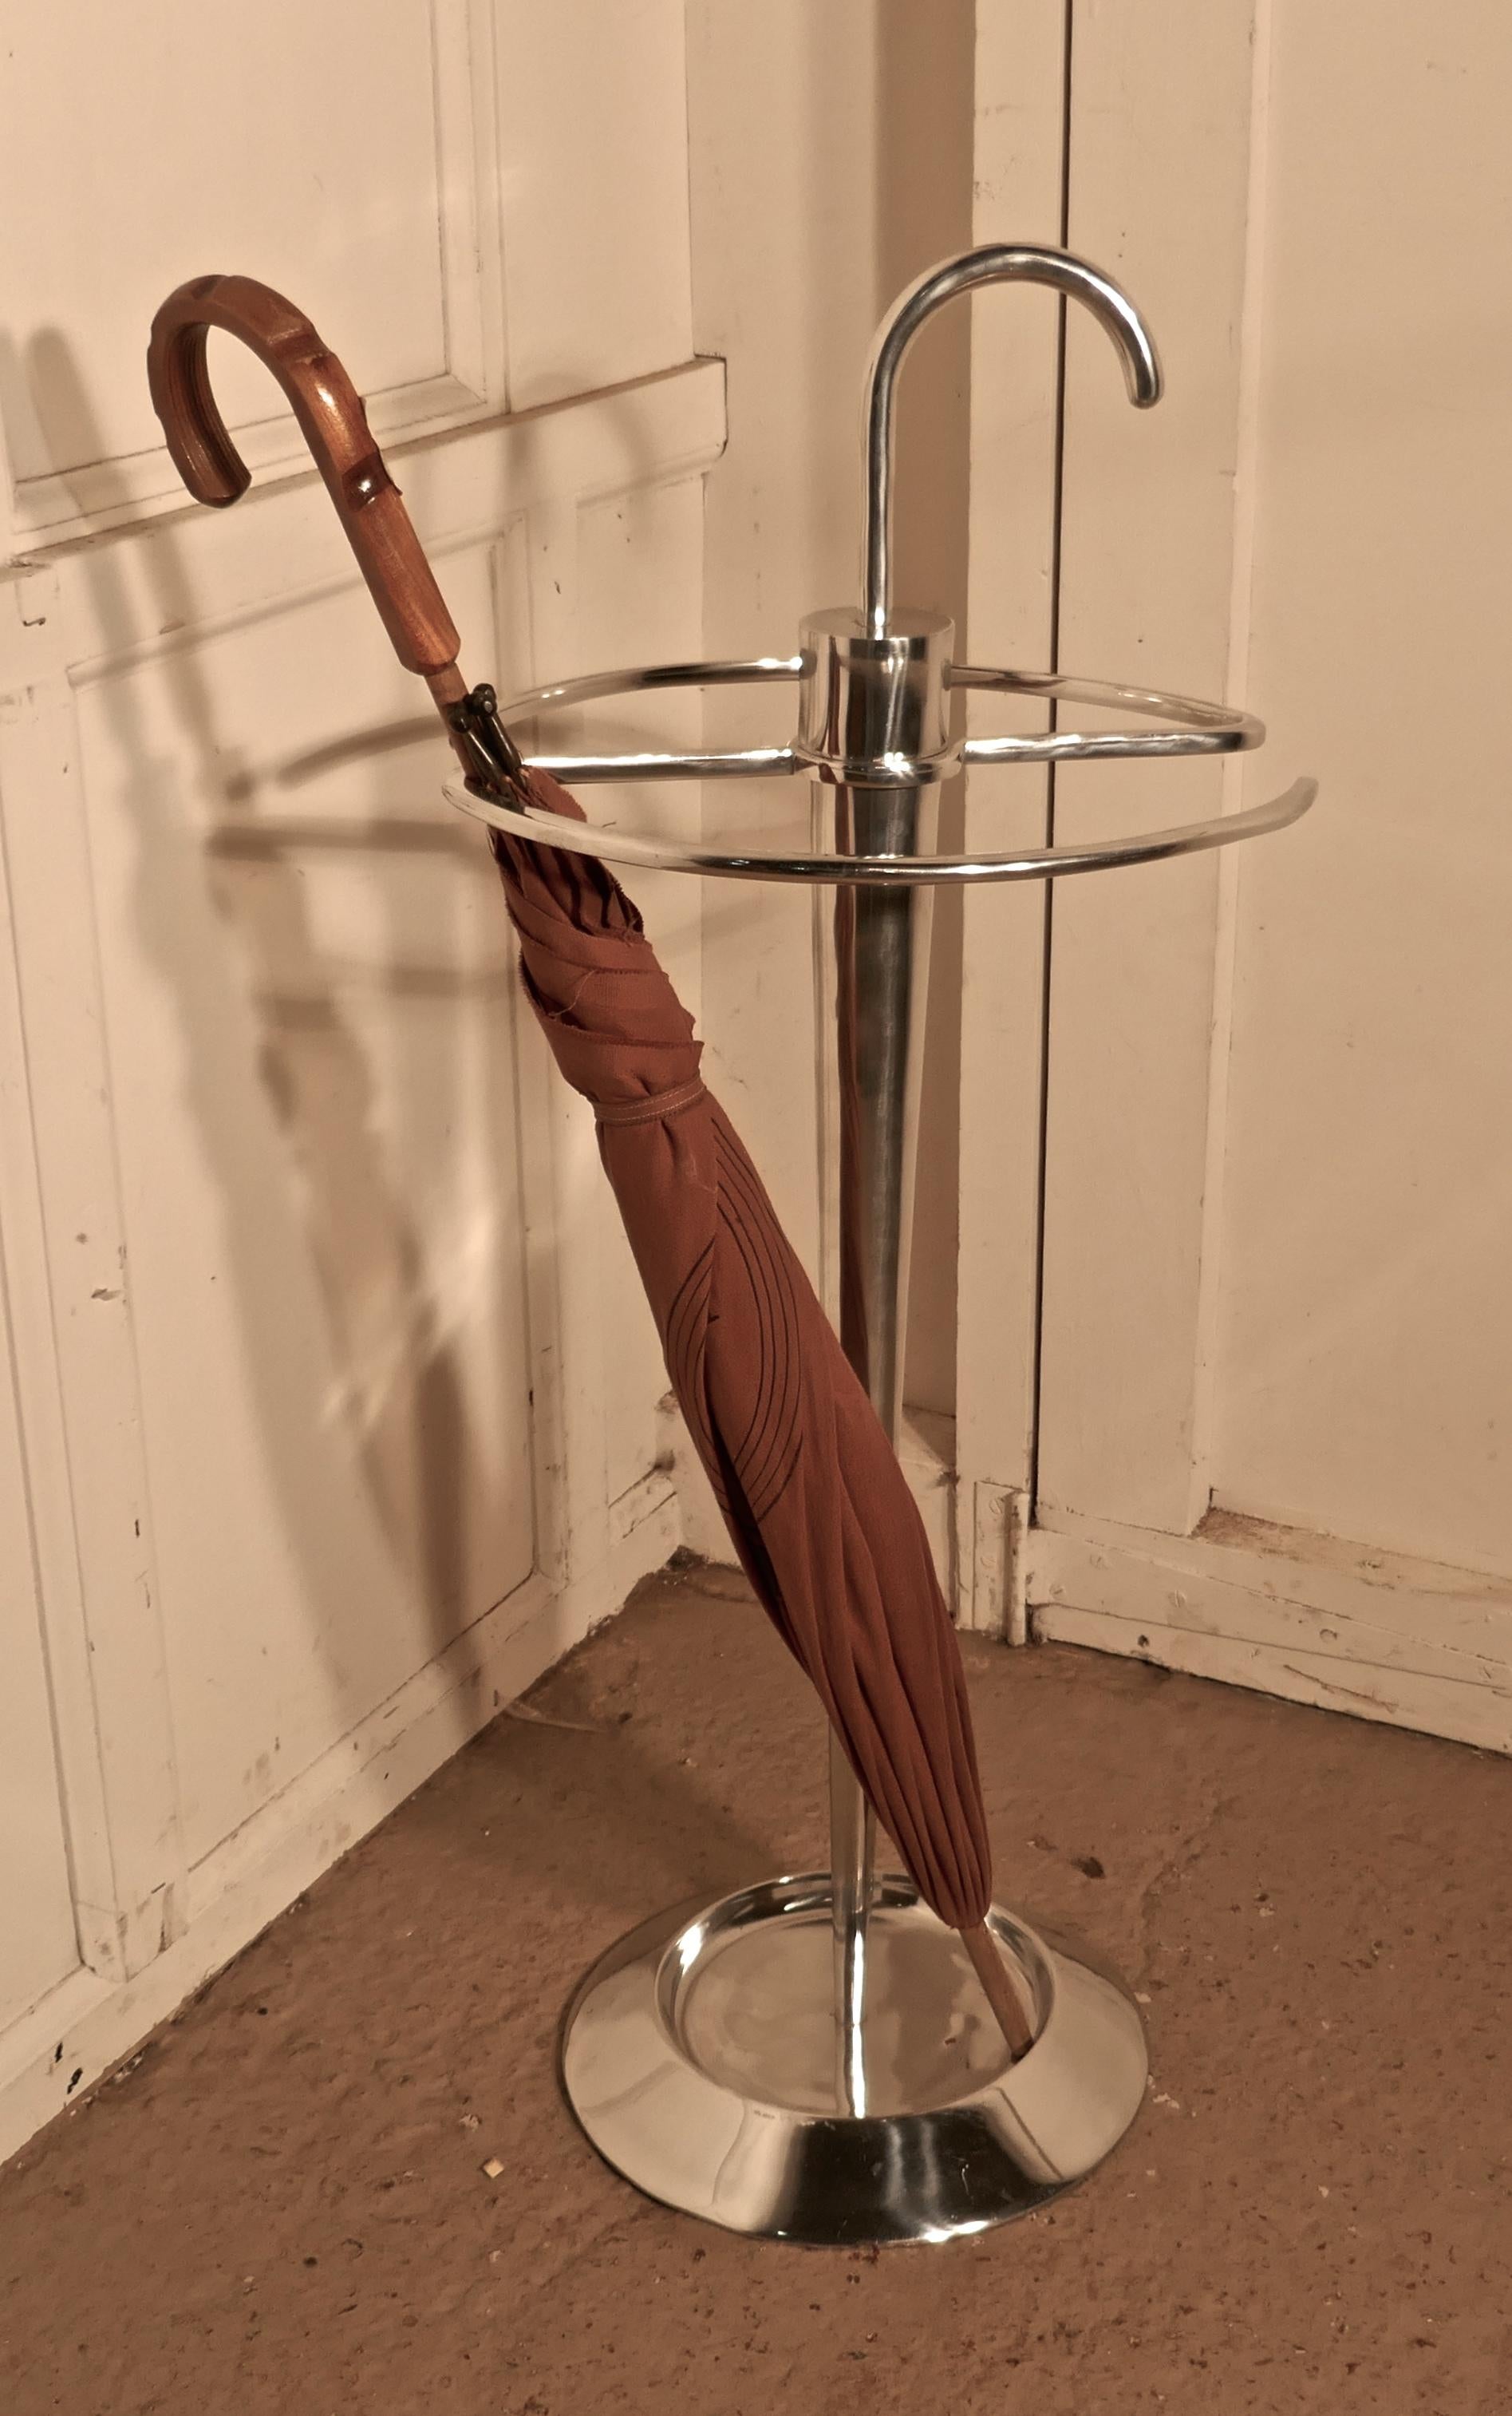 Quirky and Stylish Art Deco Chrome umbrella or stick stand

Great fun, the chrome umbrella, is an umbrella stand, the umbrella is made in tubular chrome, in the shape of and umbrella, it would work just as well as a walking stick stand
There is